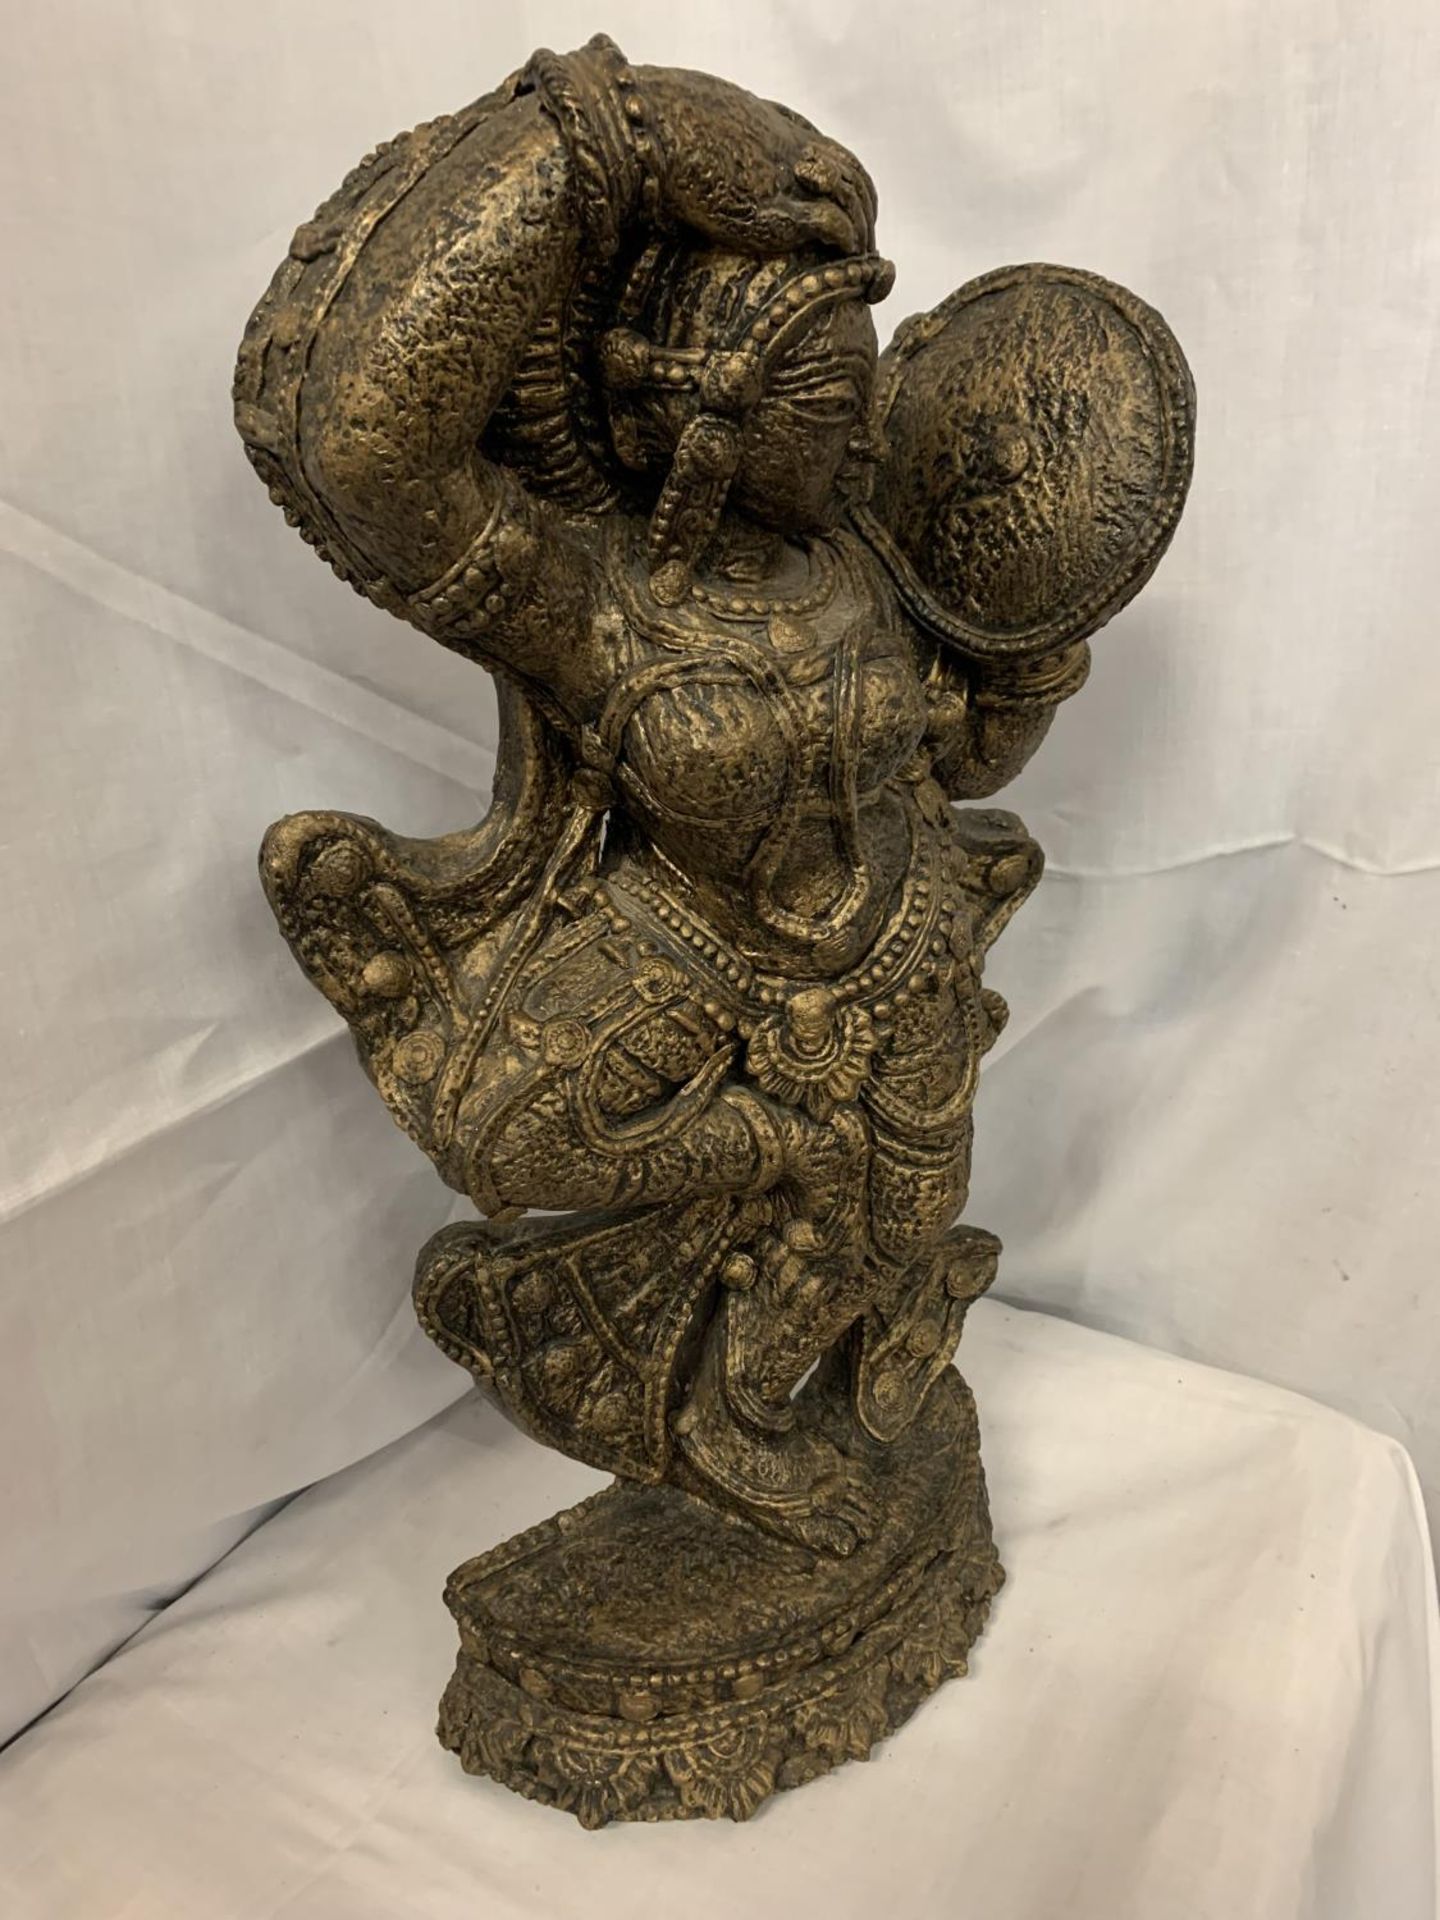 A LARGE RESIN FIGURE OF A BUDDHA 54CM HIGH - Image 3 of 3